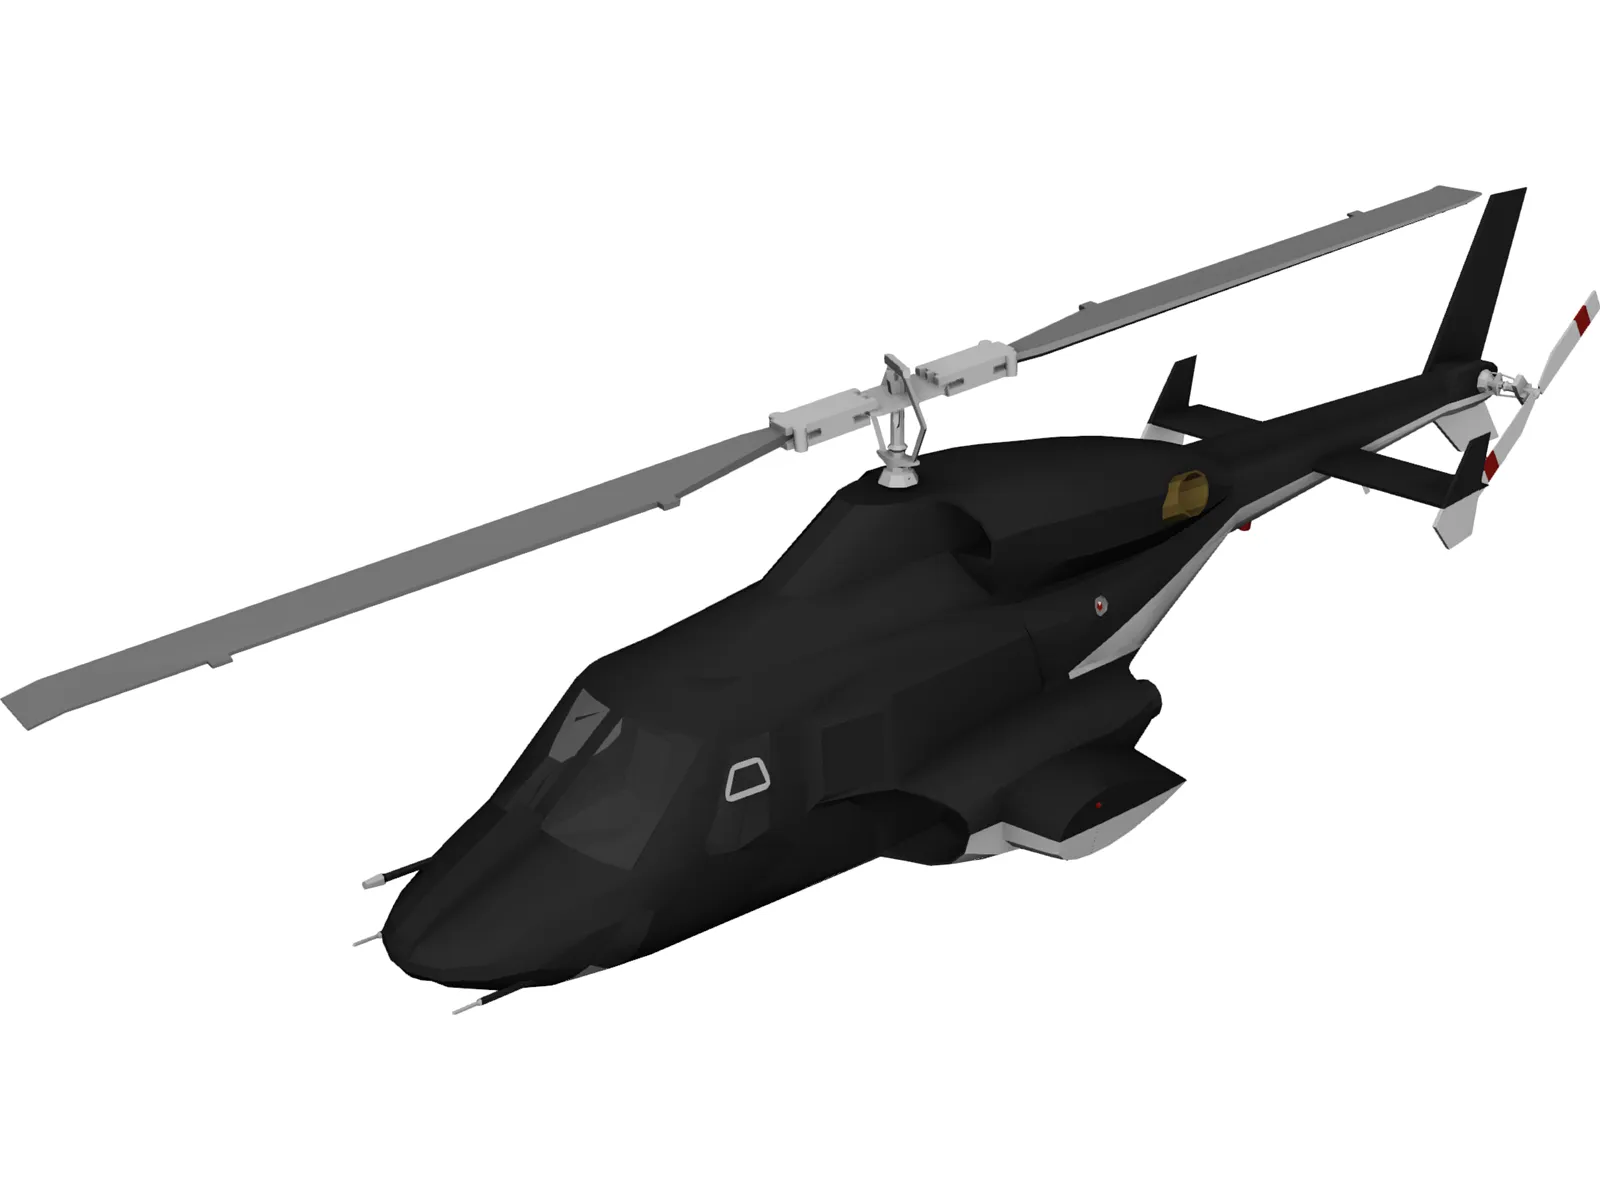 Airwolf Helicopter 3D Model